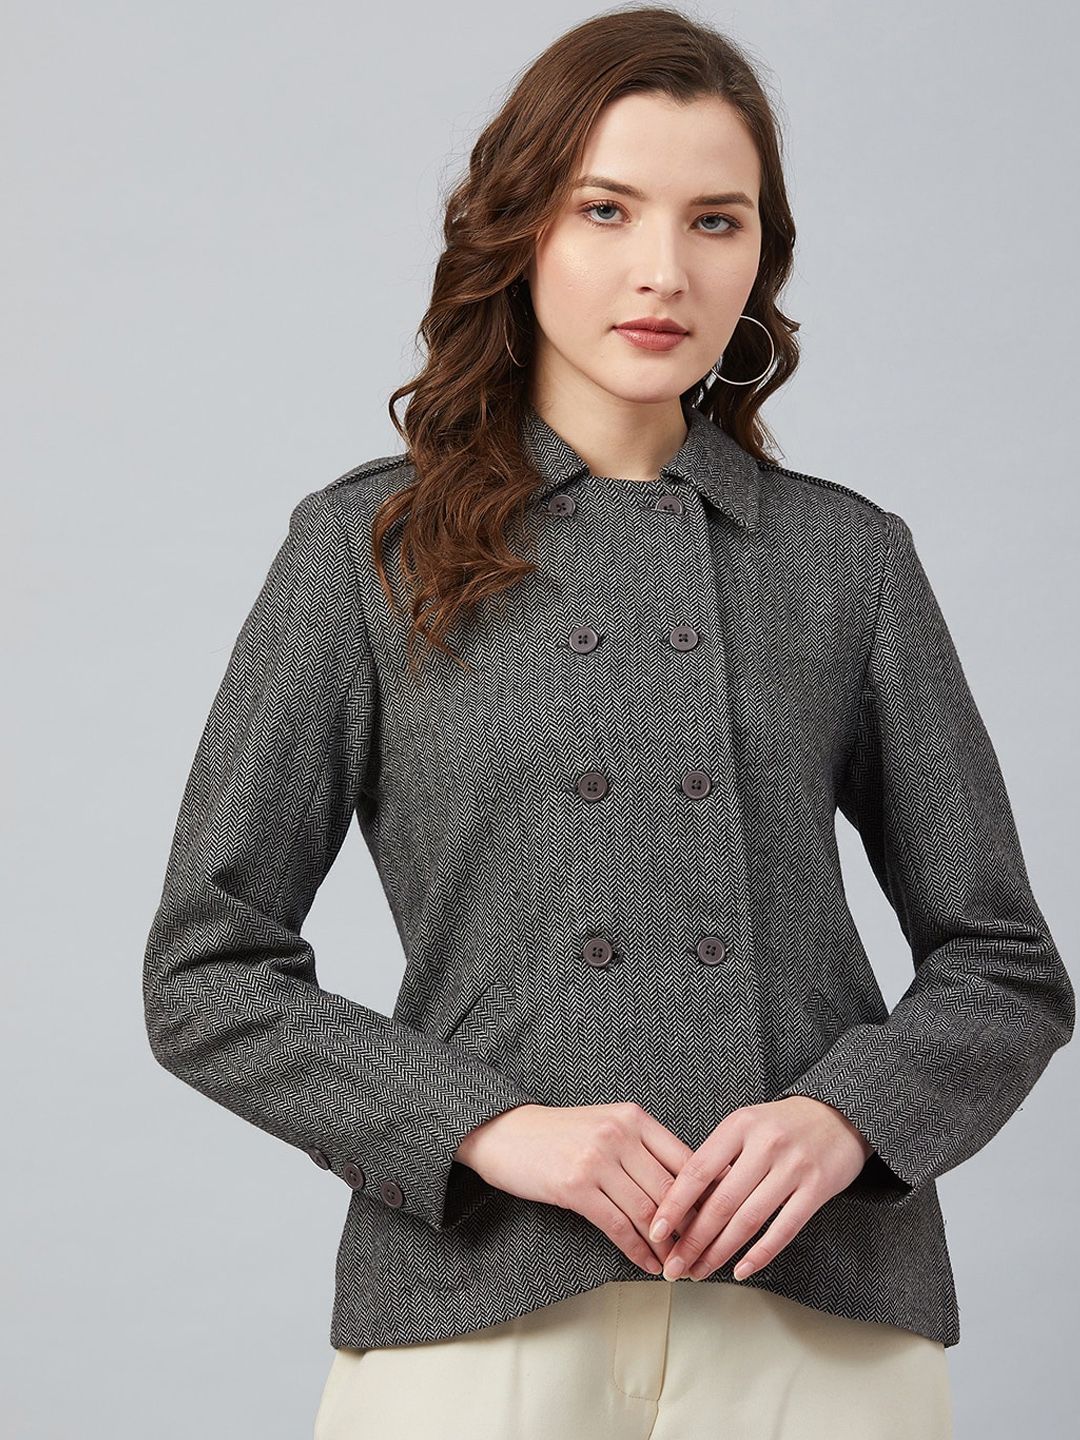 Marie Claire Women Grey Solid Tailored Jacket Price in India